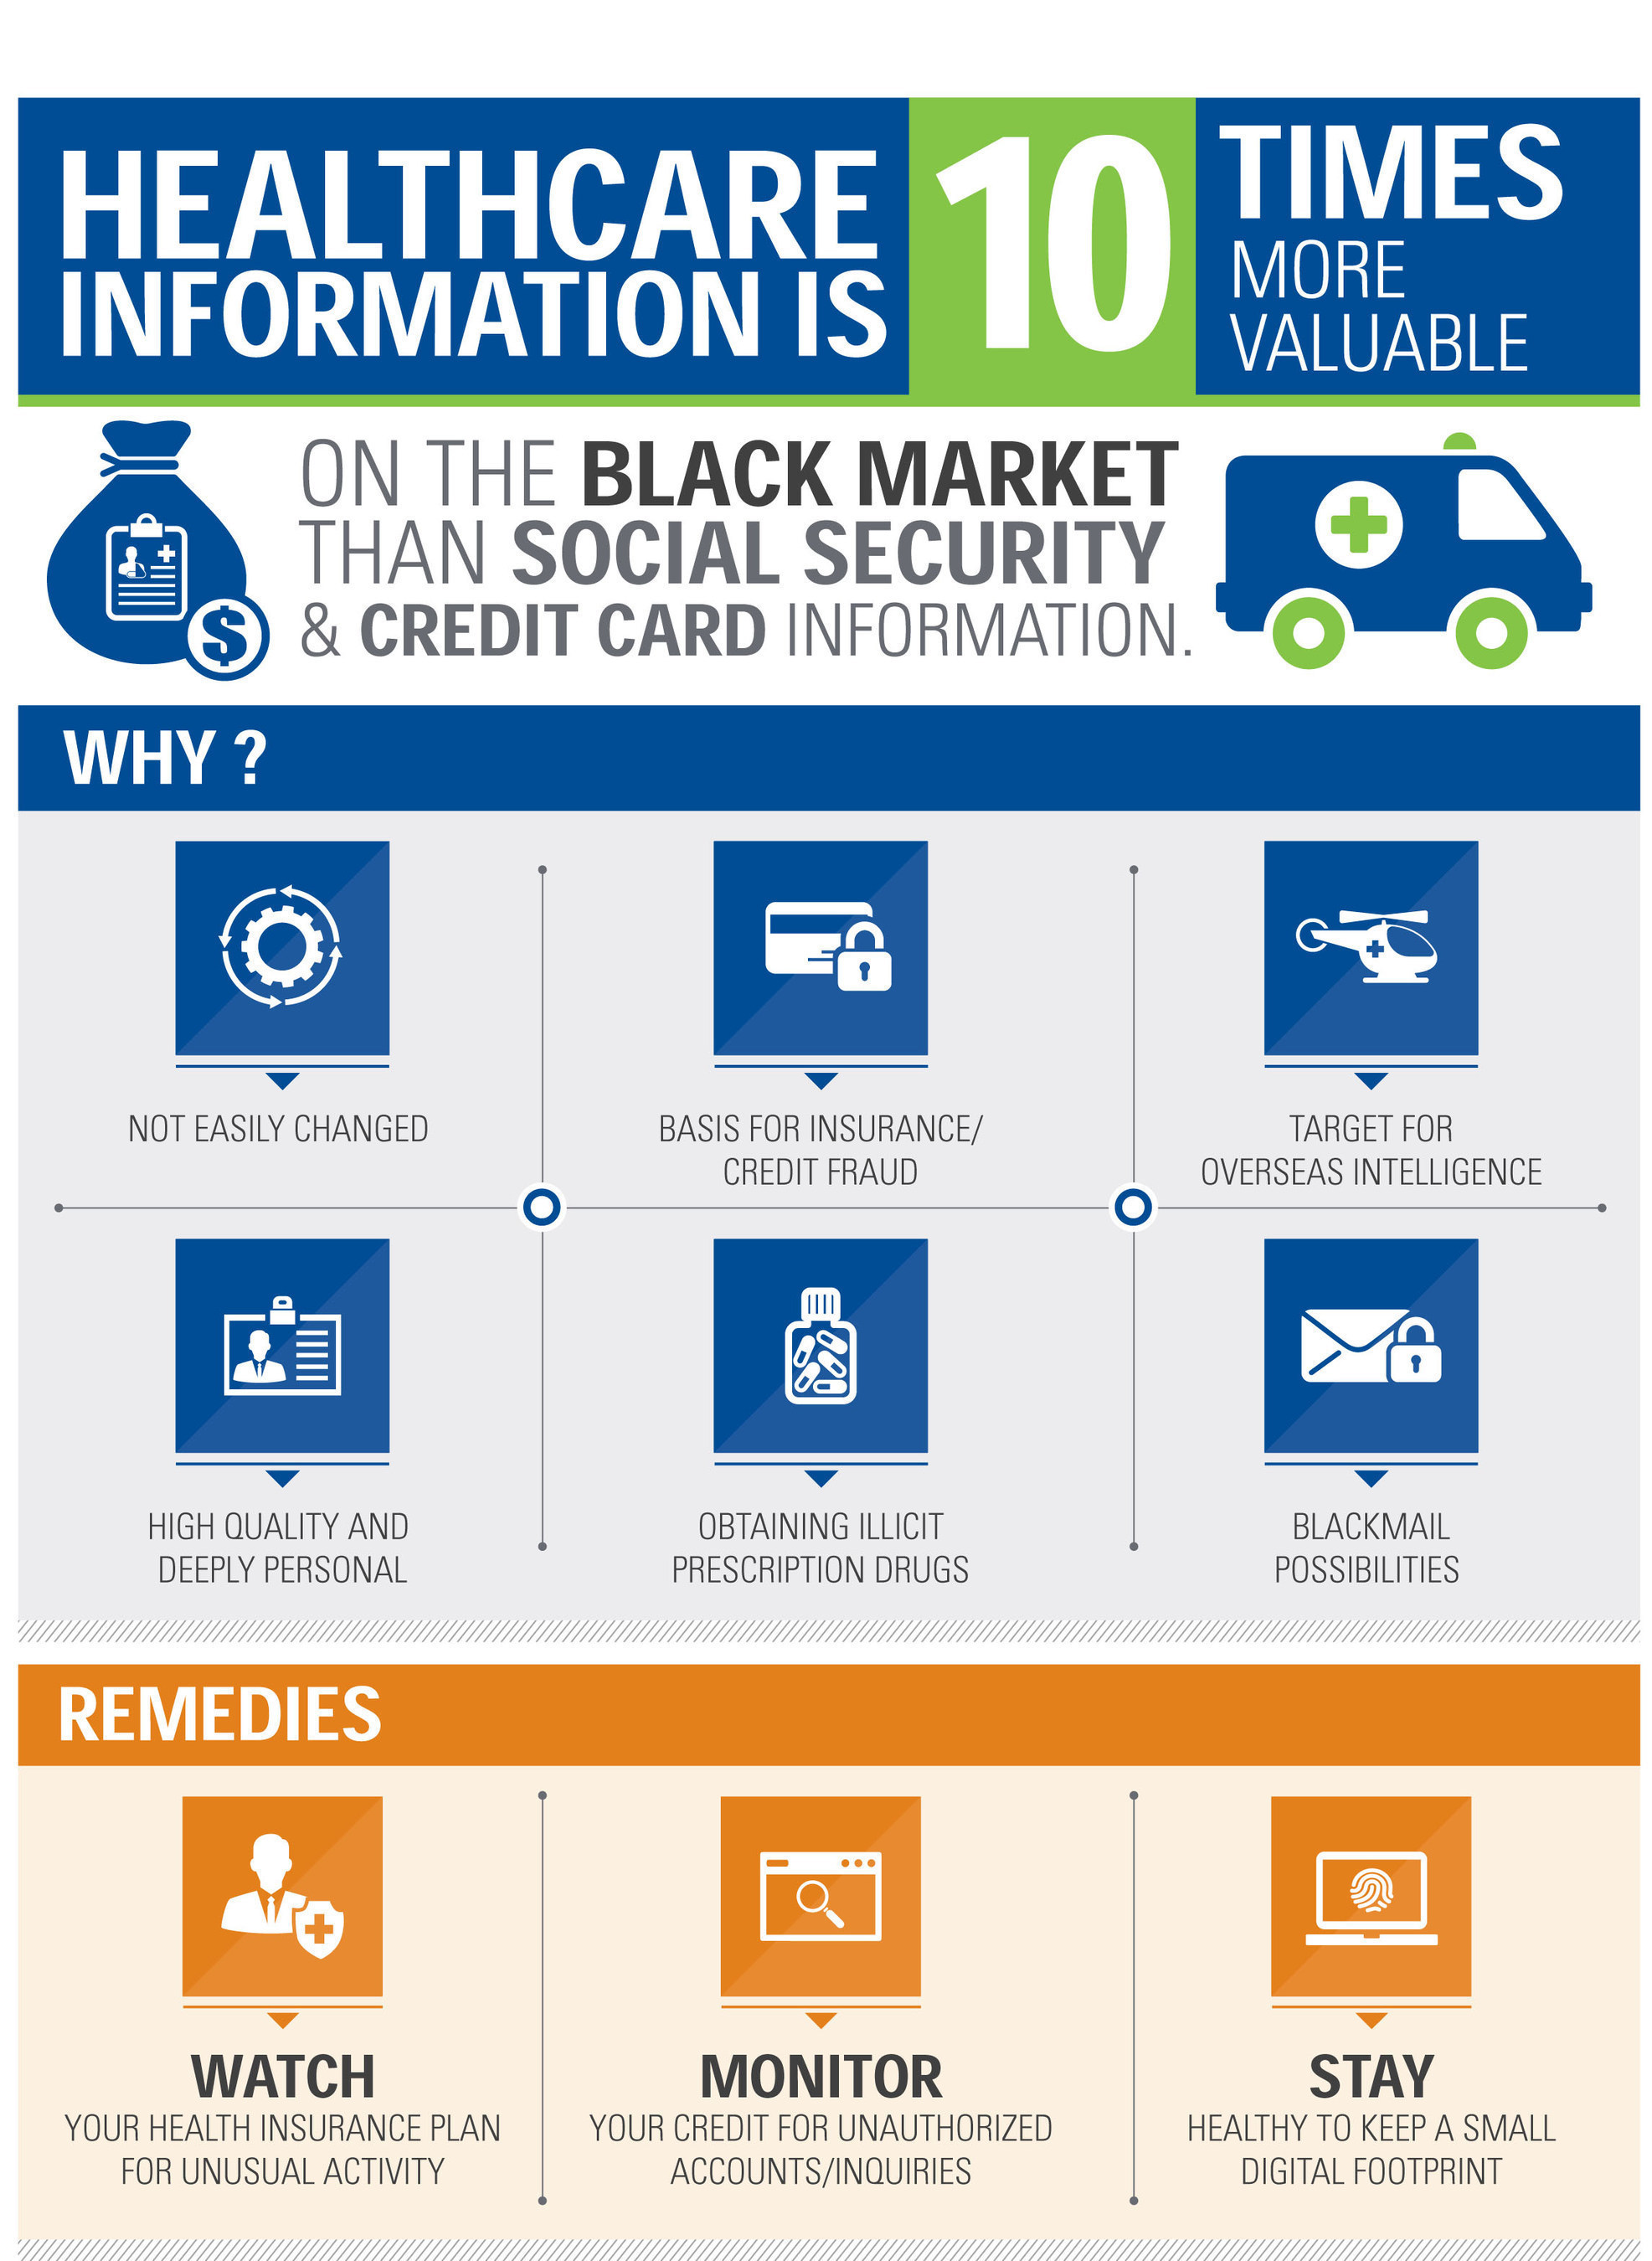 Why healthcare information is valuable -- KPMG infographic.